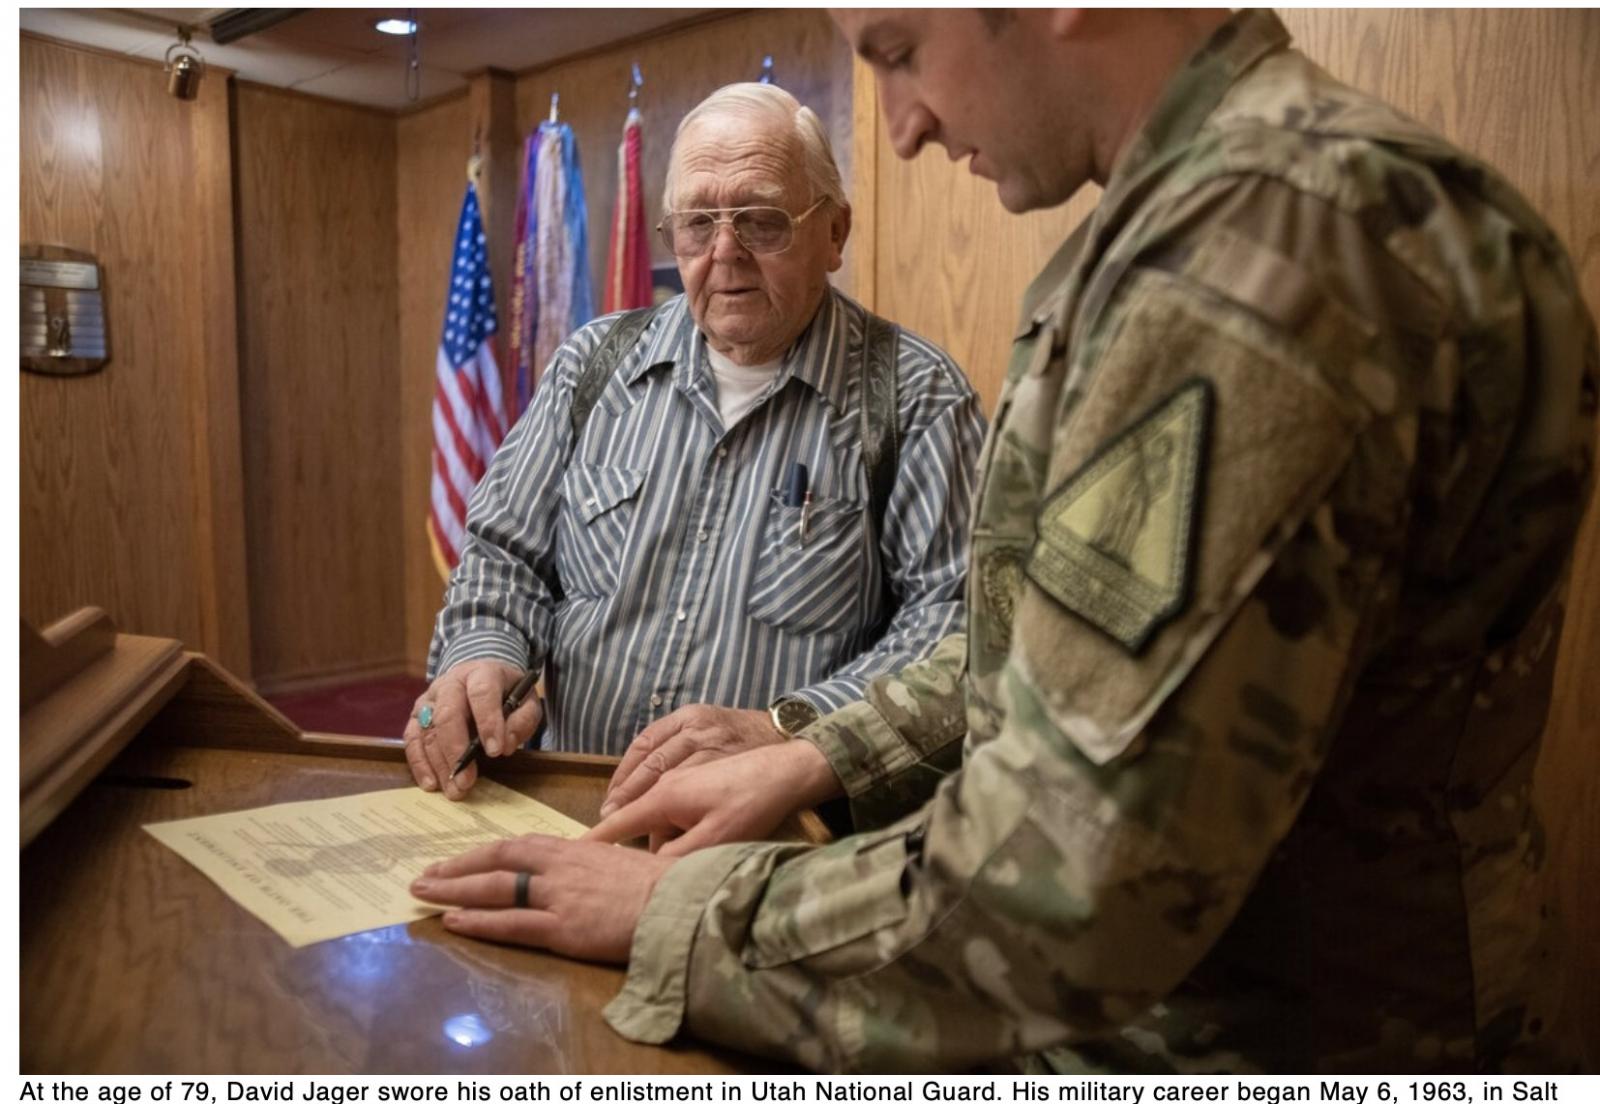  Your Army This 79-year-old Utah man just swore his Army enlistment oath